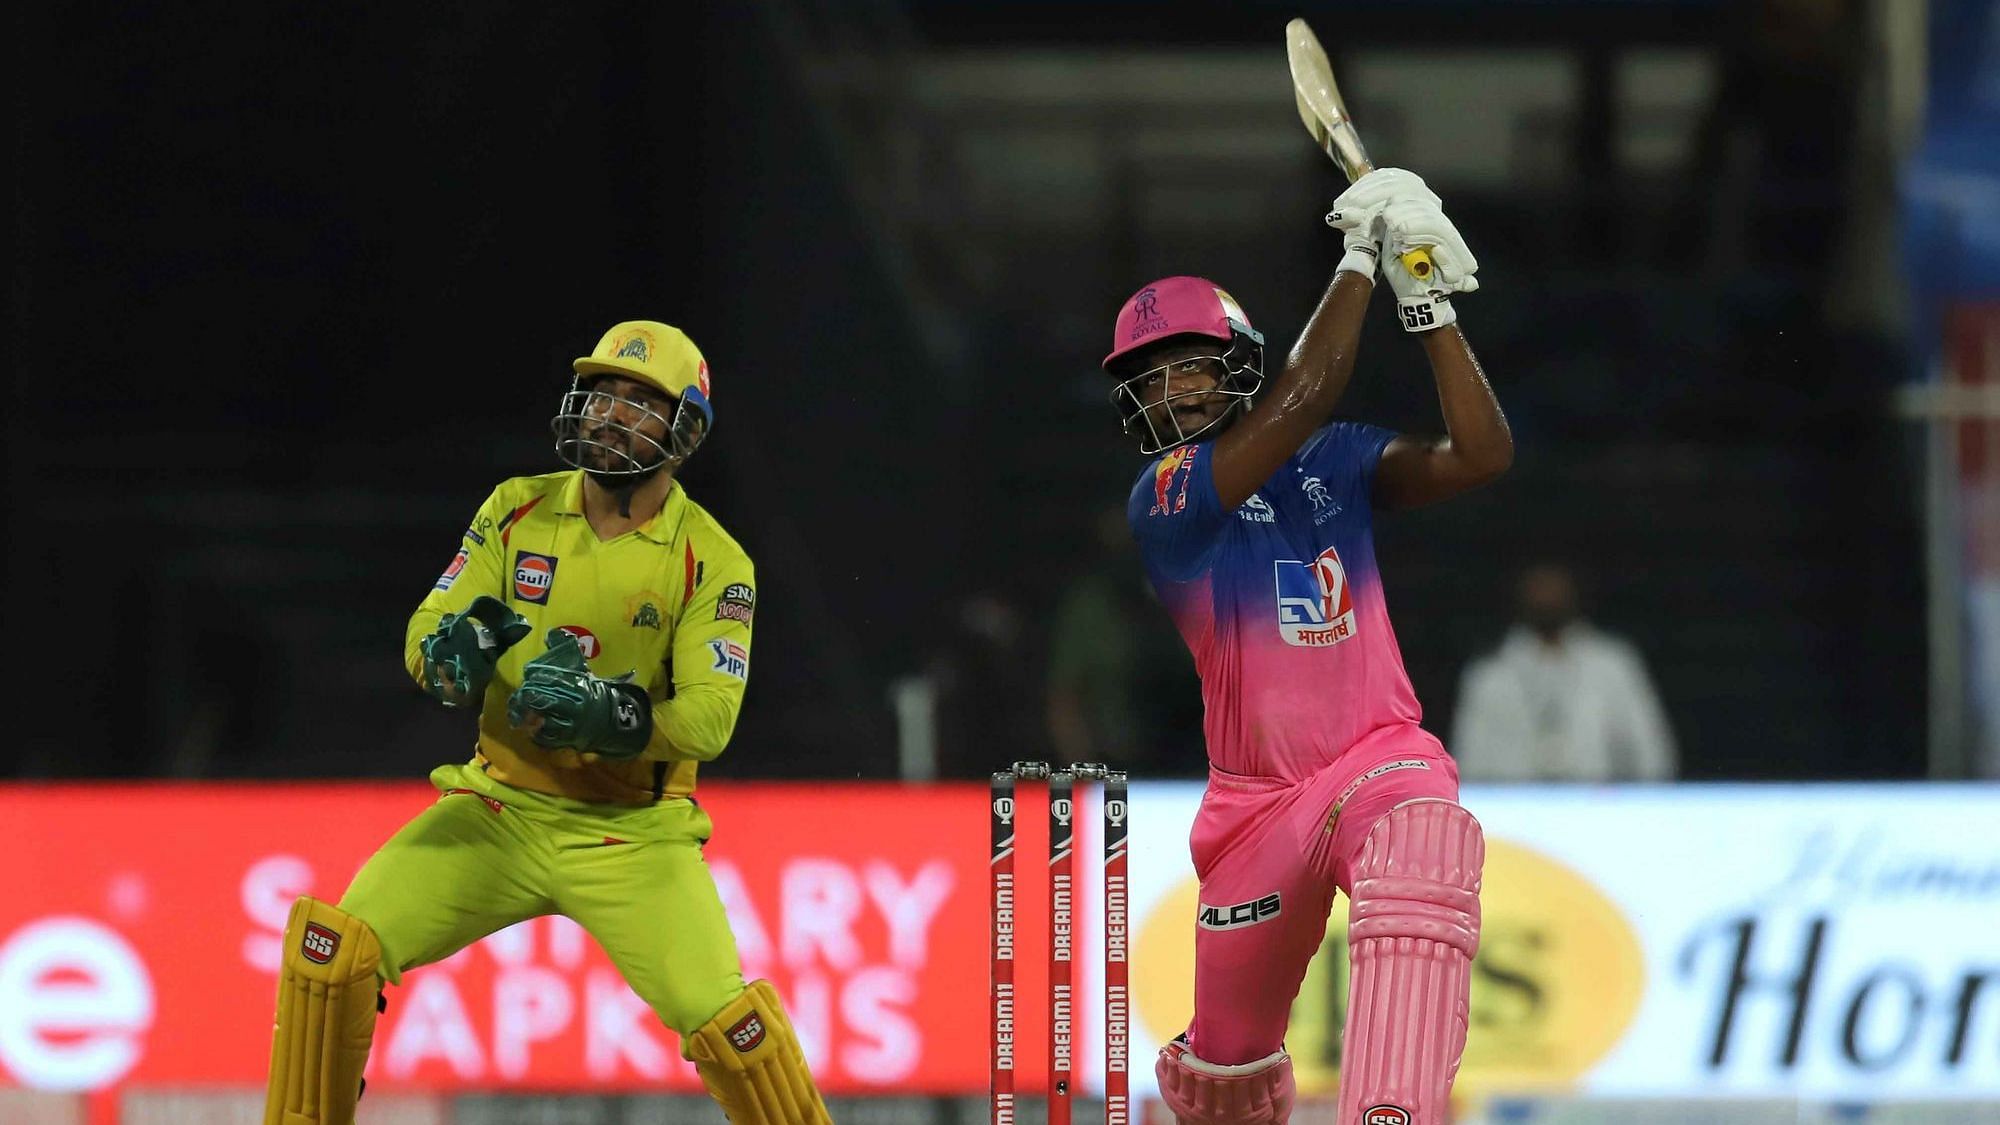 Sanju Samson has played a huge role in his side Rajasthan Royals’ both the wins in the IPL 2020